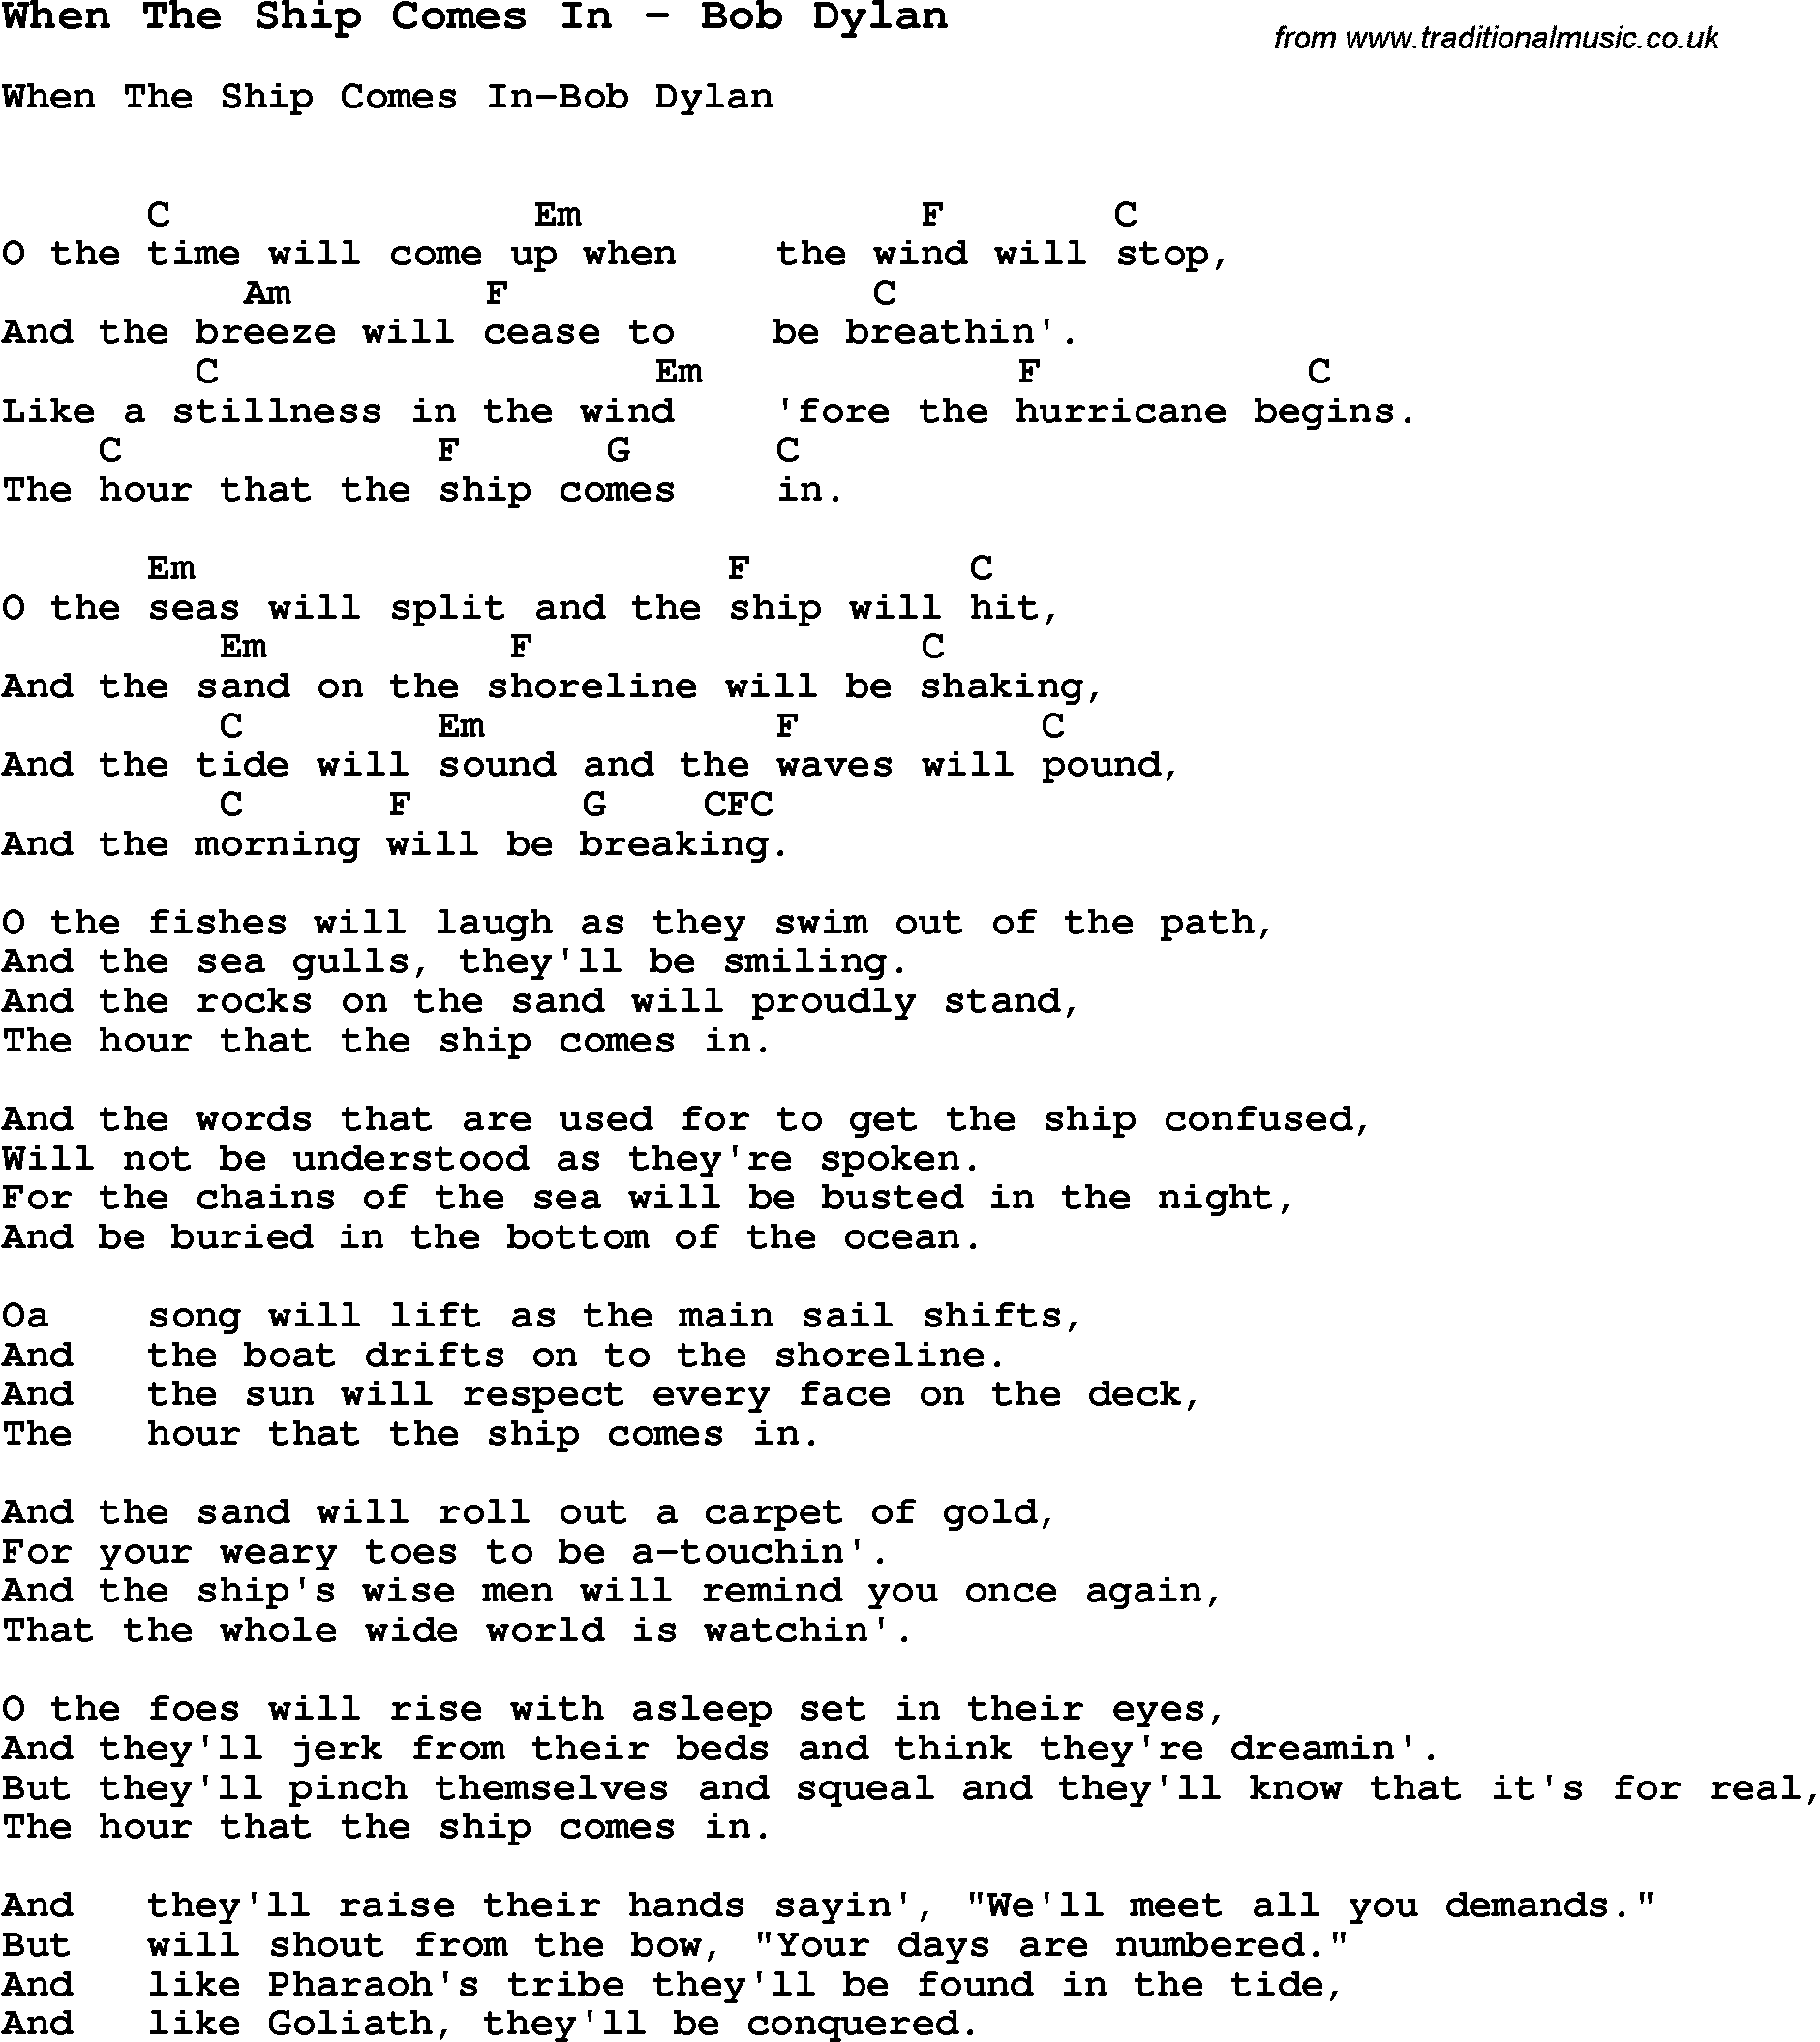 Song When The Ship Comes In by Bob Dylan, with lyrics for vocal performance and accompaniment chords for Ukulele, Guitar Banjo etc.